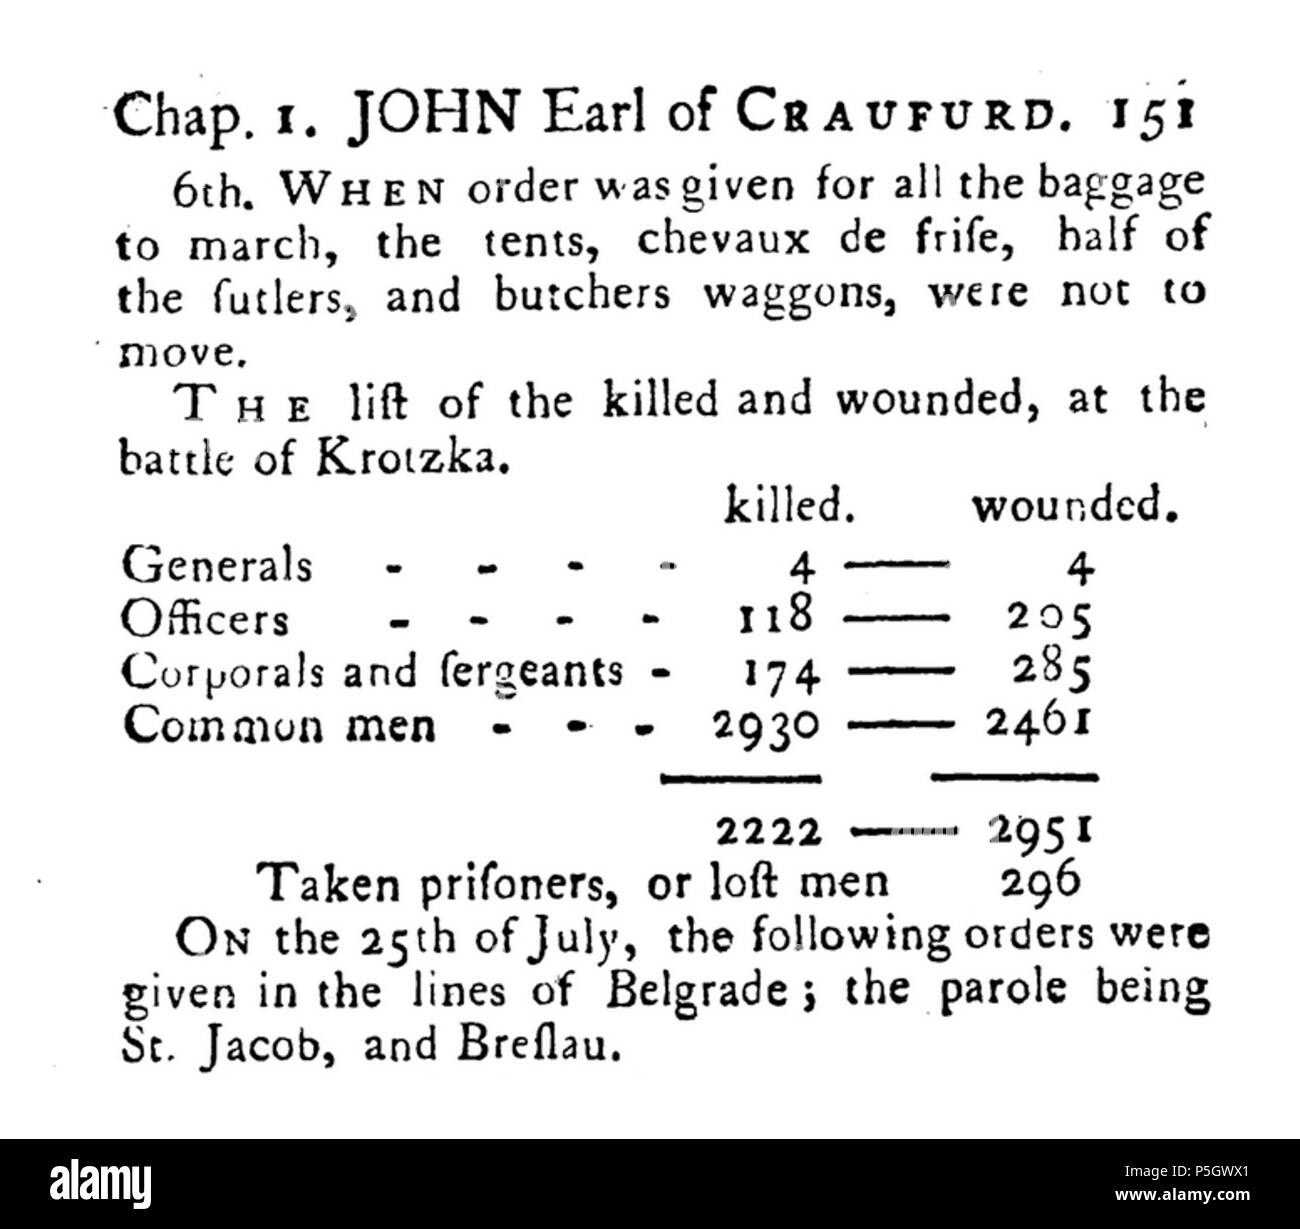 N/A. English: Casualties of the Battle of Grocka, fought in July 22, 1739, by John Lindsay, 20th Earl of Crawford, as mentioned in his Memoirs of the life of the late Right Honourable John, Earl of Craufurd, co-authored by Richard Rolt and published by Henry Köpp soon after his death. Caption is from the 1769 edition printed by T. Becket, page 151. Note: The sum of casualties is either a misprint or a miscalculation. Sum is mentioned as 2222, but it should be 3226, that is four generals and 3222 men. Lindsay didn't count generals in sums, as total of casualties listed as wounded would be 2955  Stock Photo